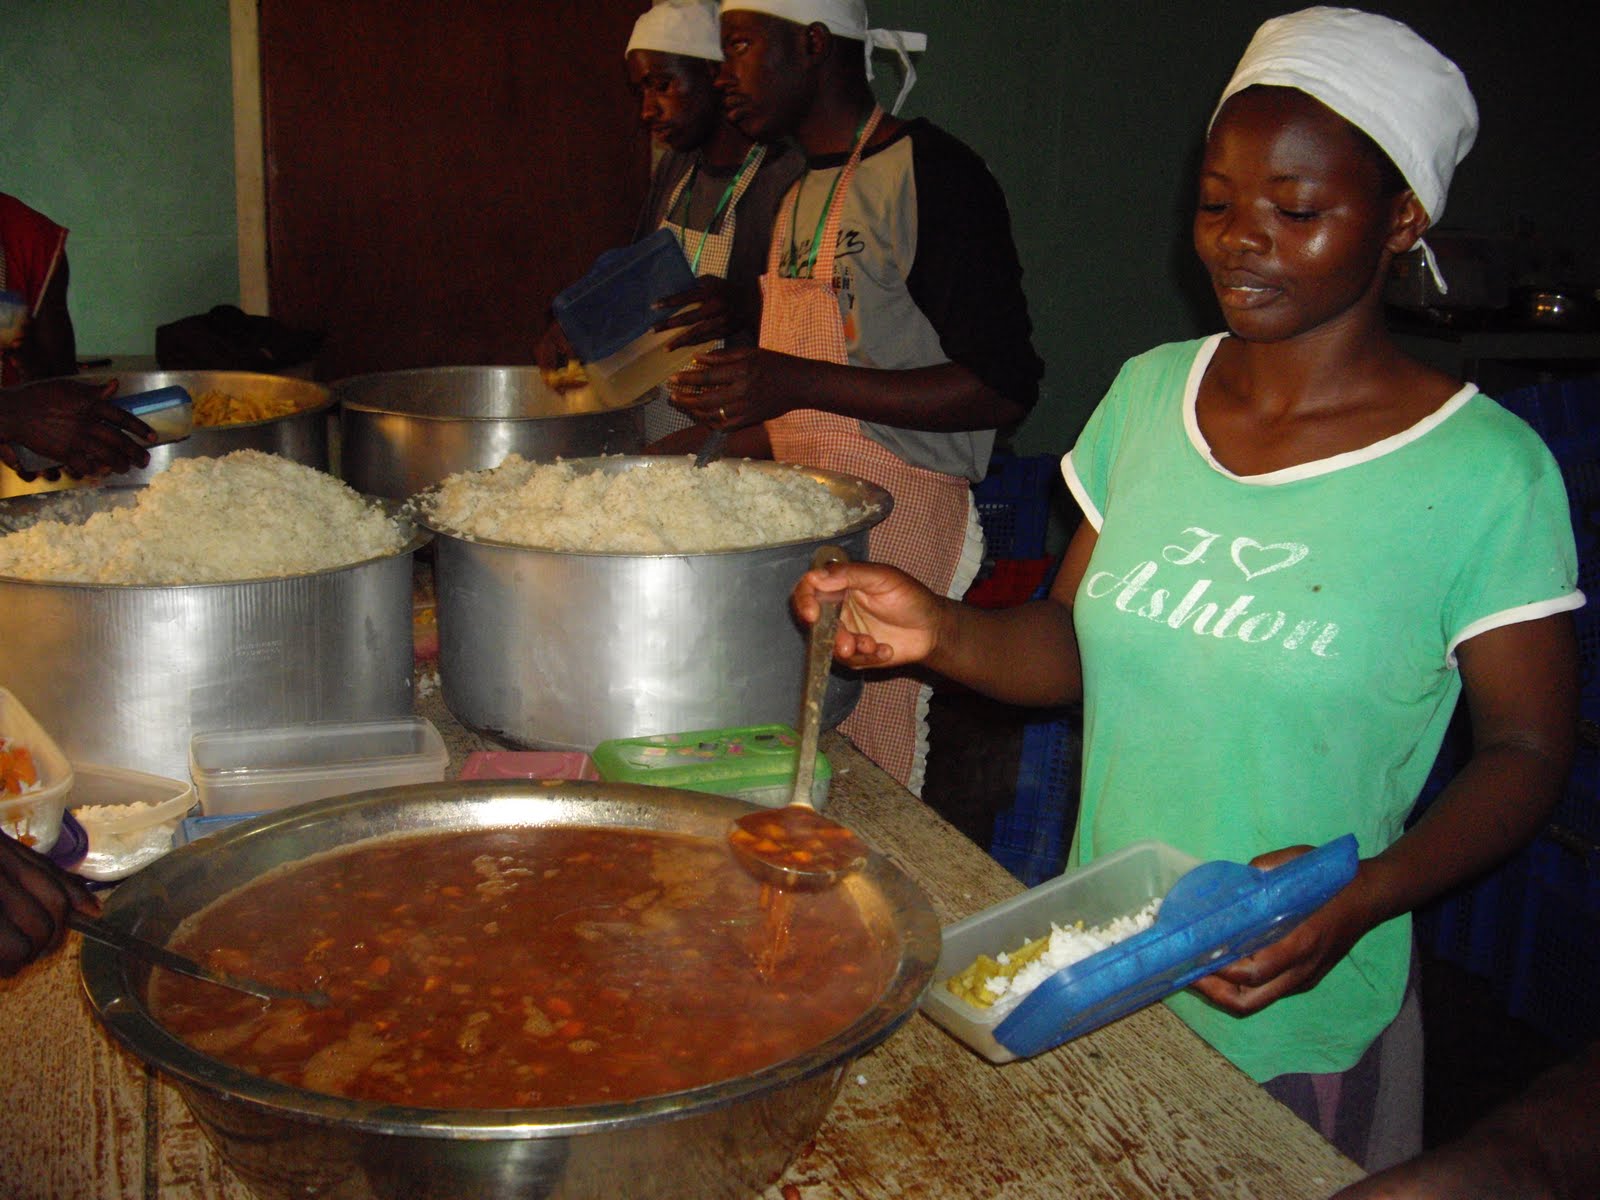 Jane's Journal: Feeding more than 700 people 5 days a week!